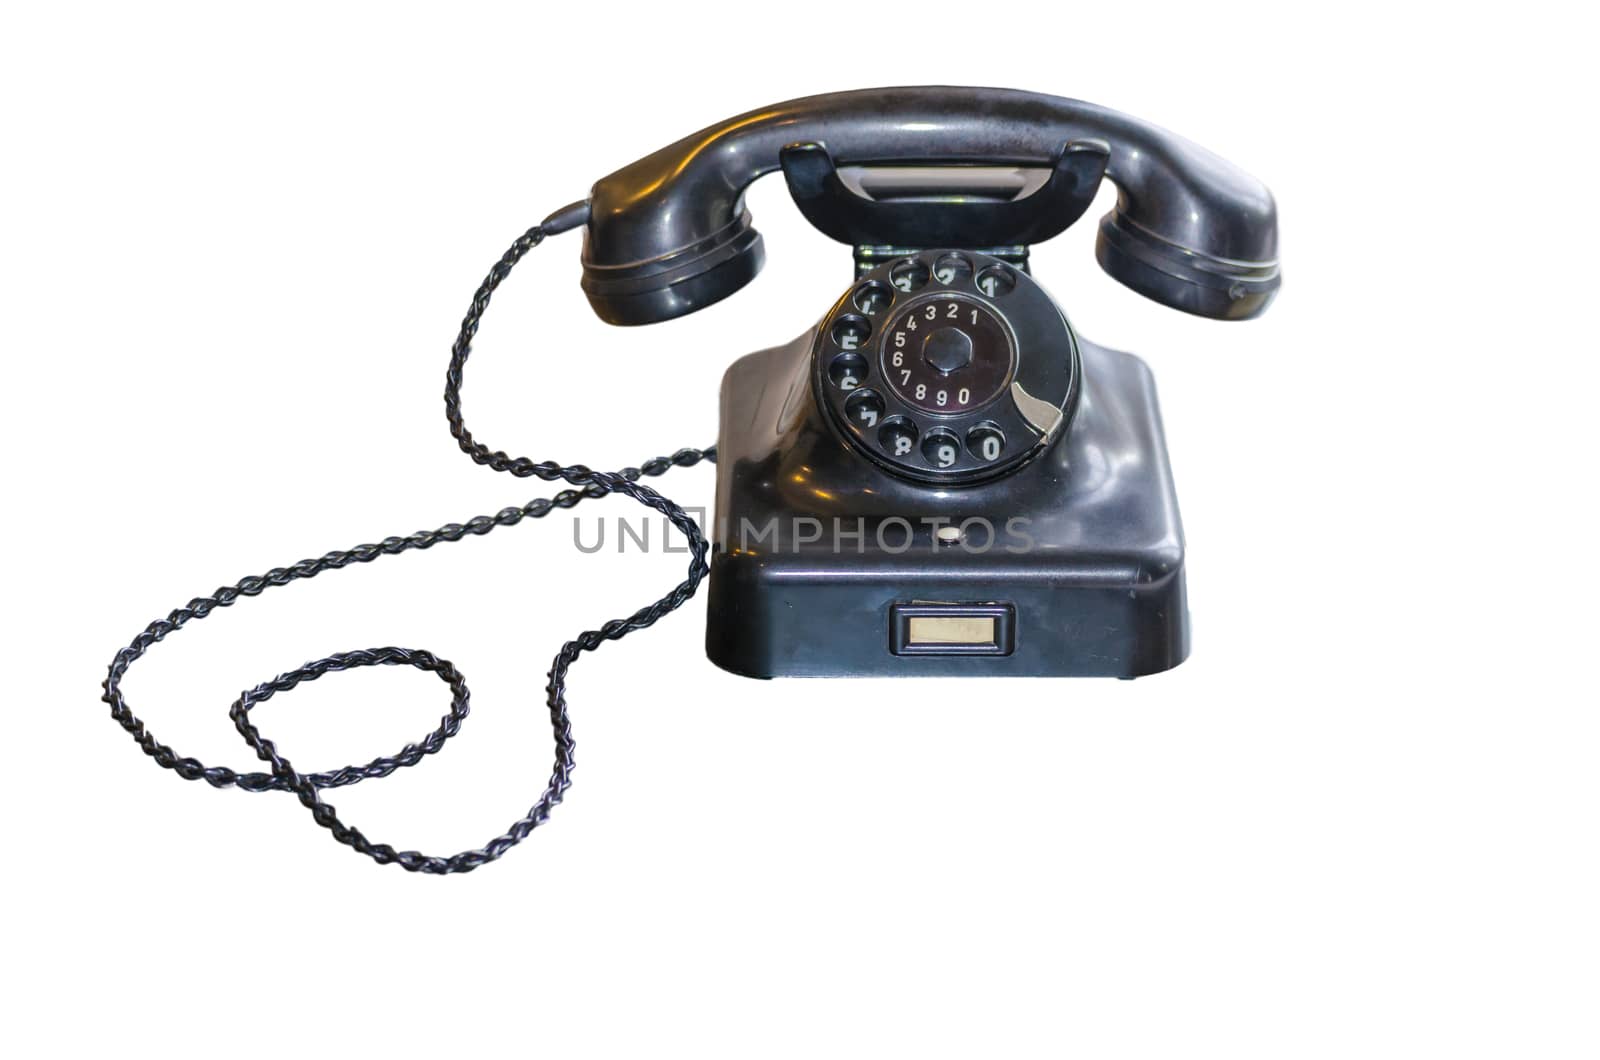 Antique Telephone with dial on white background by JFsPic